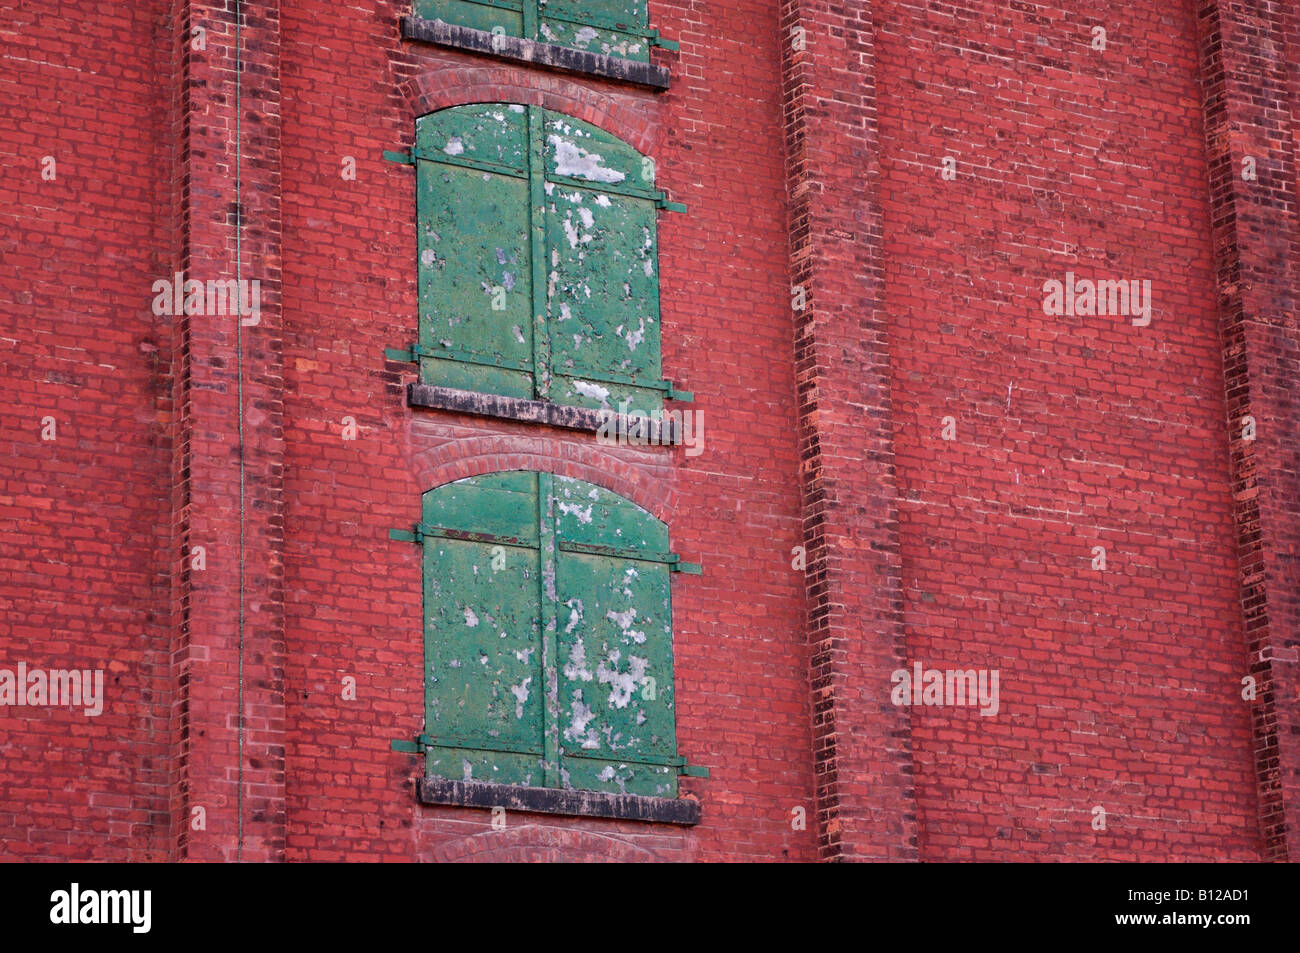 Colorful old industrial building wall Stock Photo